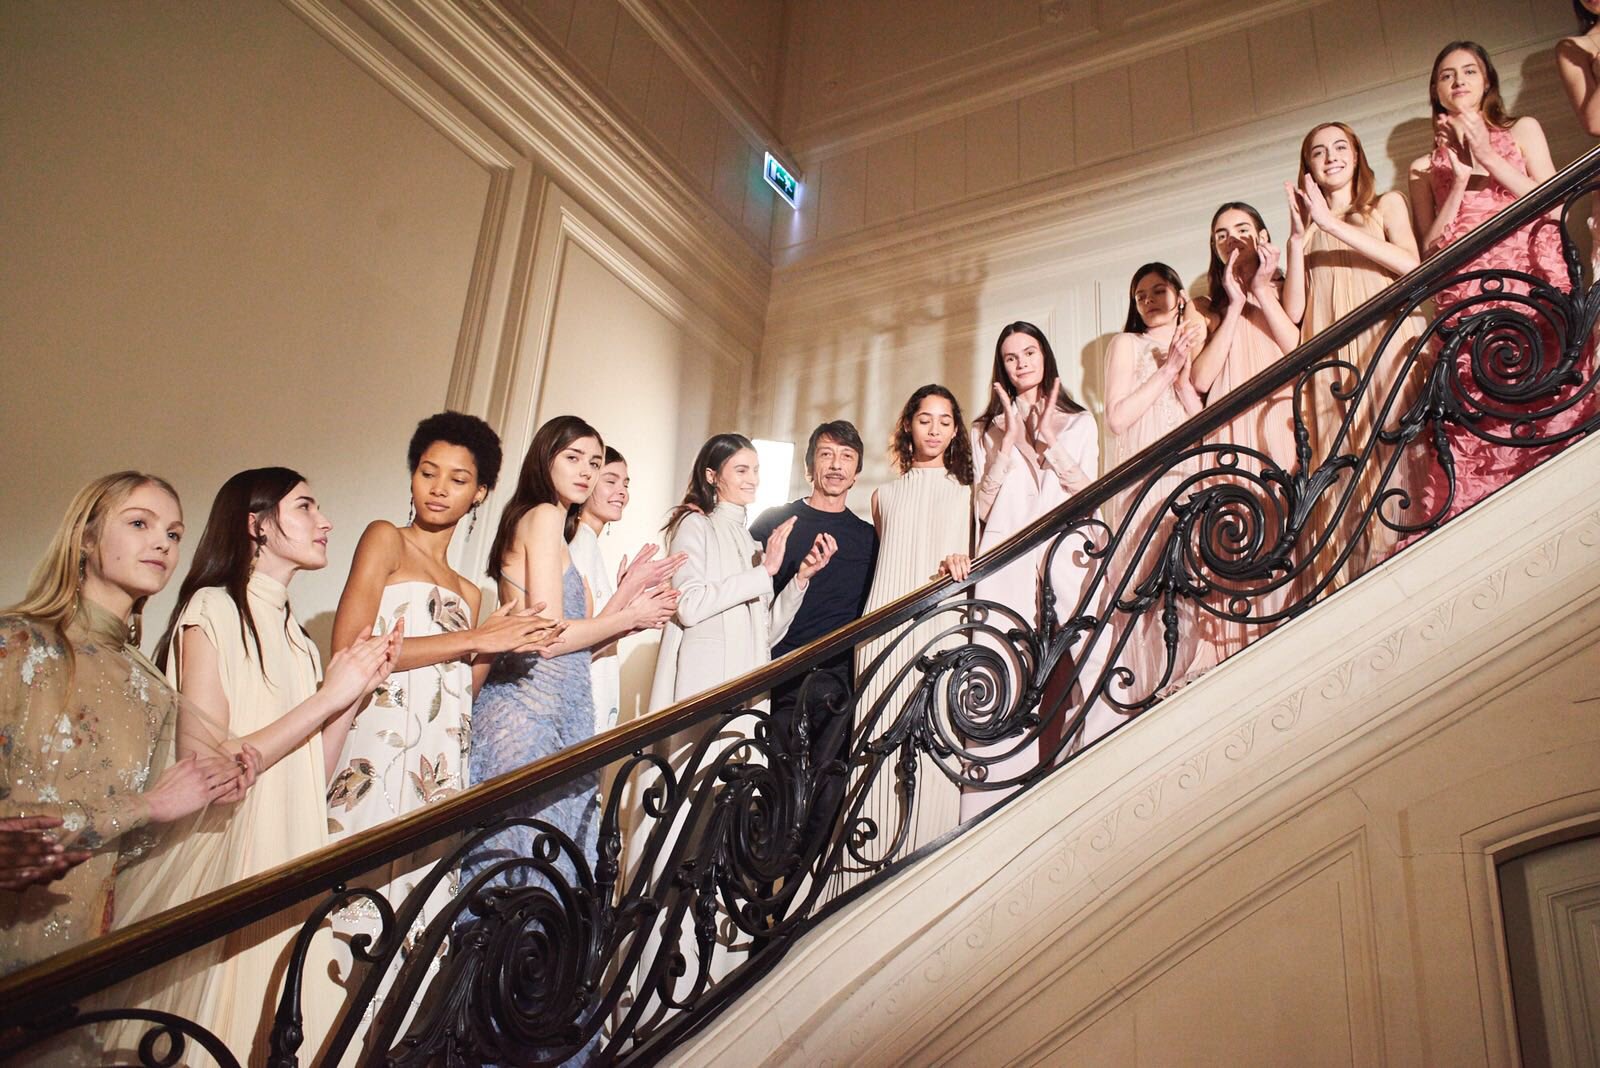 krigsskib Vær tilfreds regulere Valentino on Twitter: "A moment of applause captured backstage on the grand  staircase of Hotel Salomon de Rothschild. #HauteCouture #SS17 by  #PierpaoloPiccioli. https://t.co/DrONmr1fIC" / Twitter